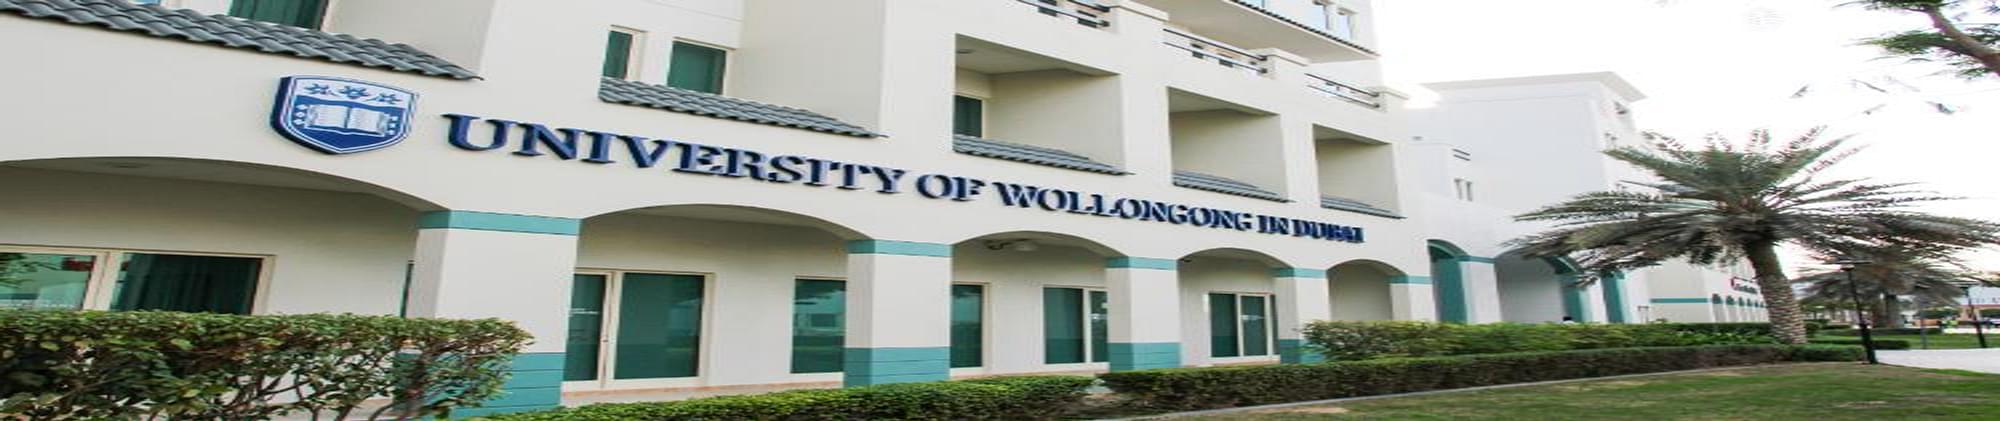 Master of Business Analytics at University Of Wollongong Dubai [UOWD],  Dubai Fees, Entry Requirement & Application Deadline